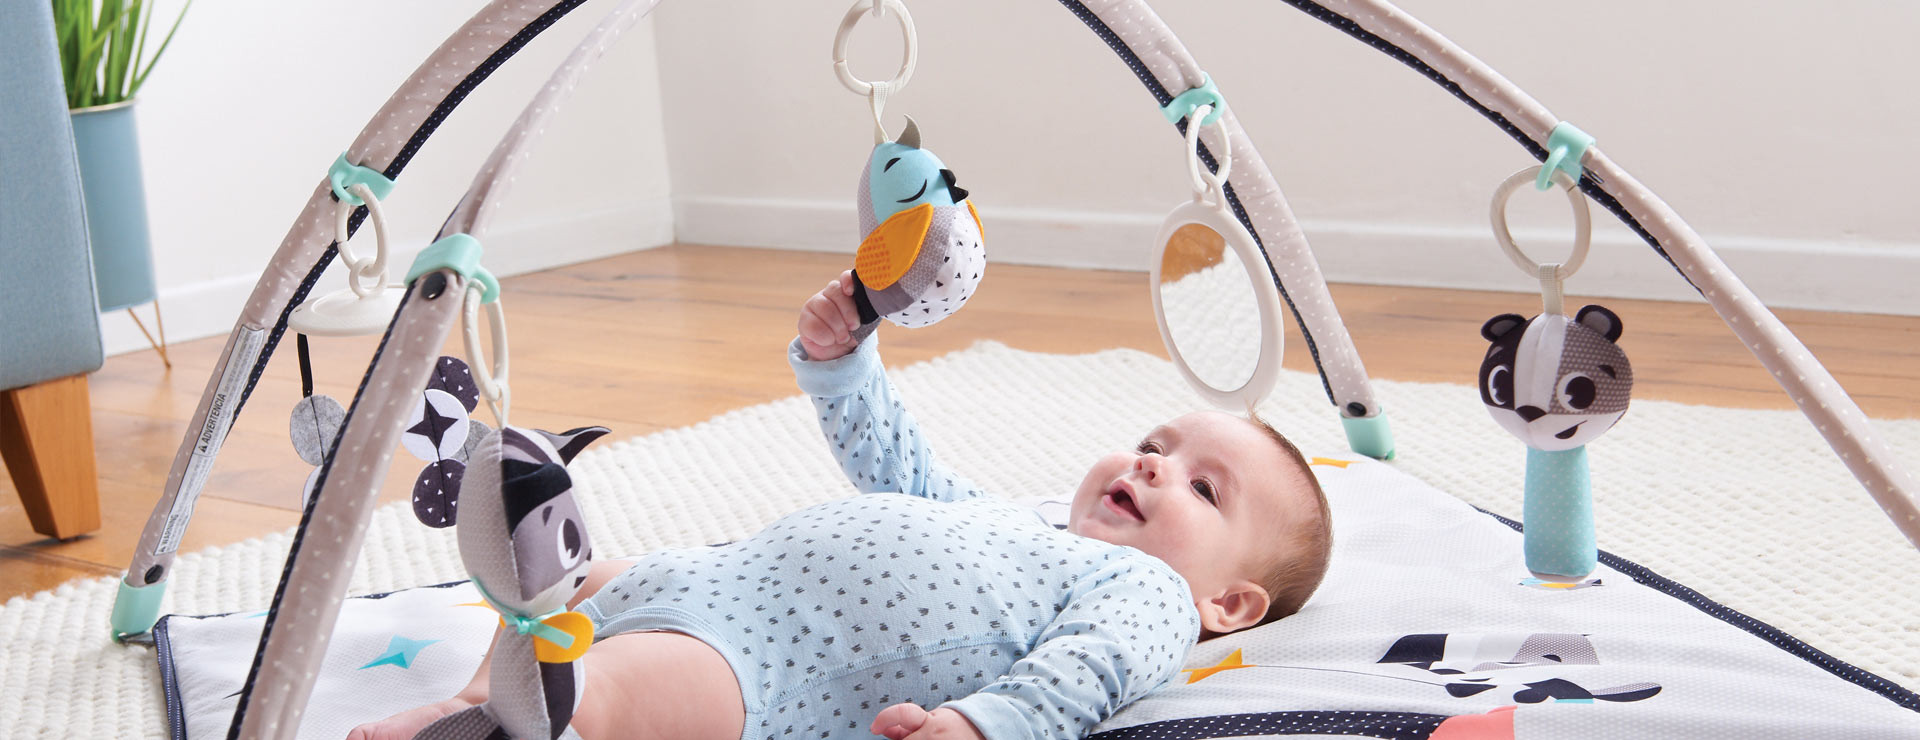 Stimulating and interactive toys entertain baby and support healthy development 